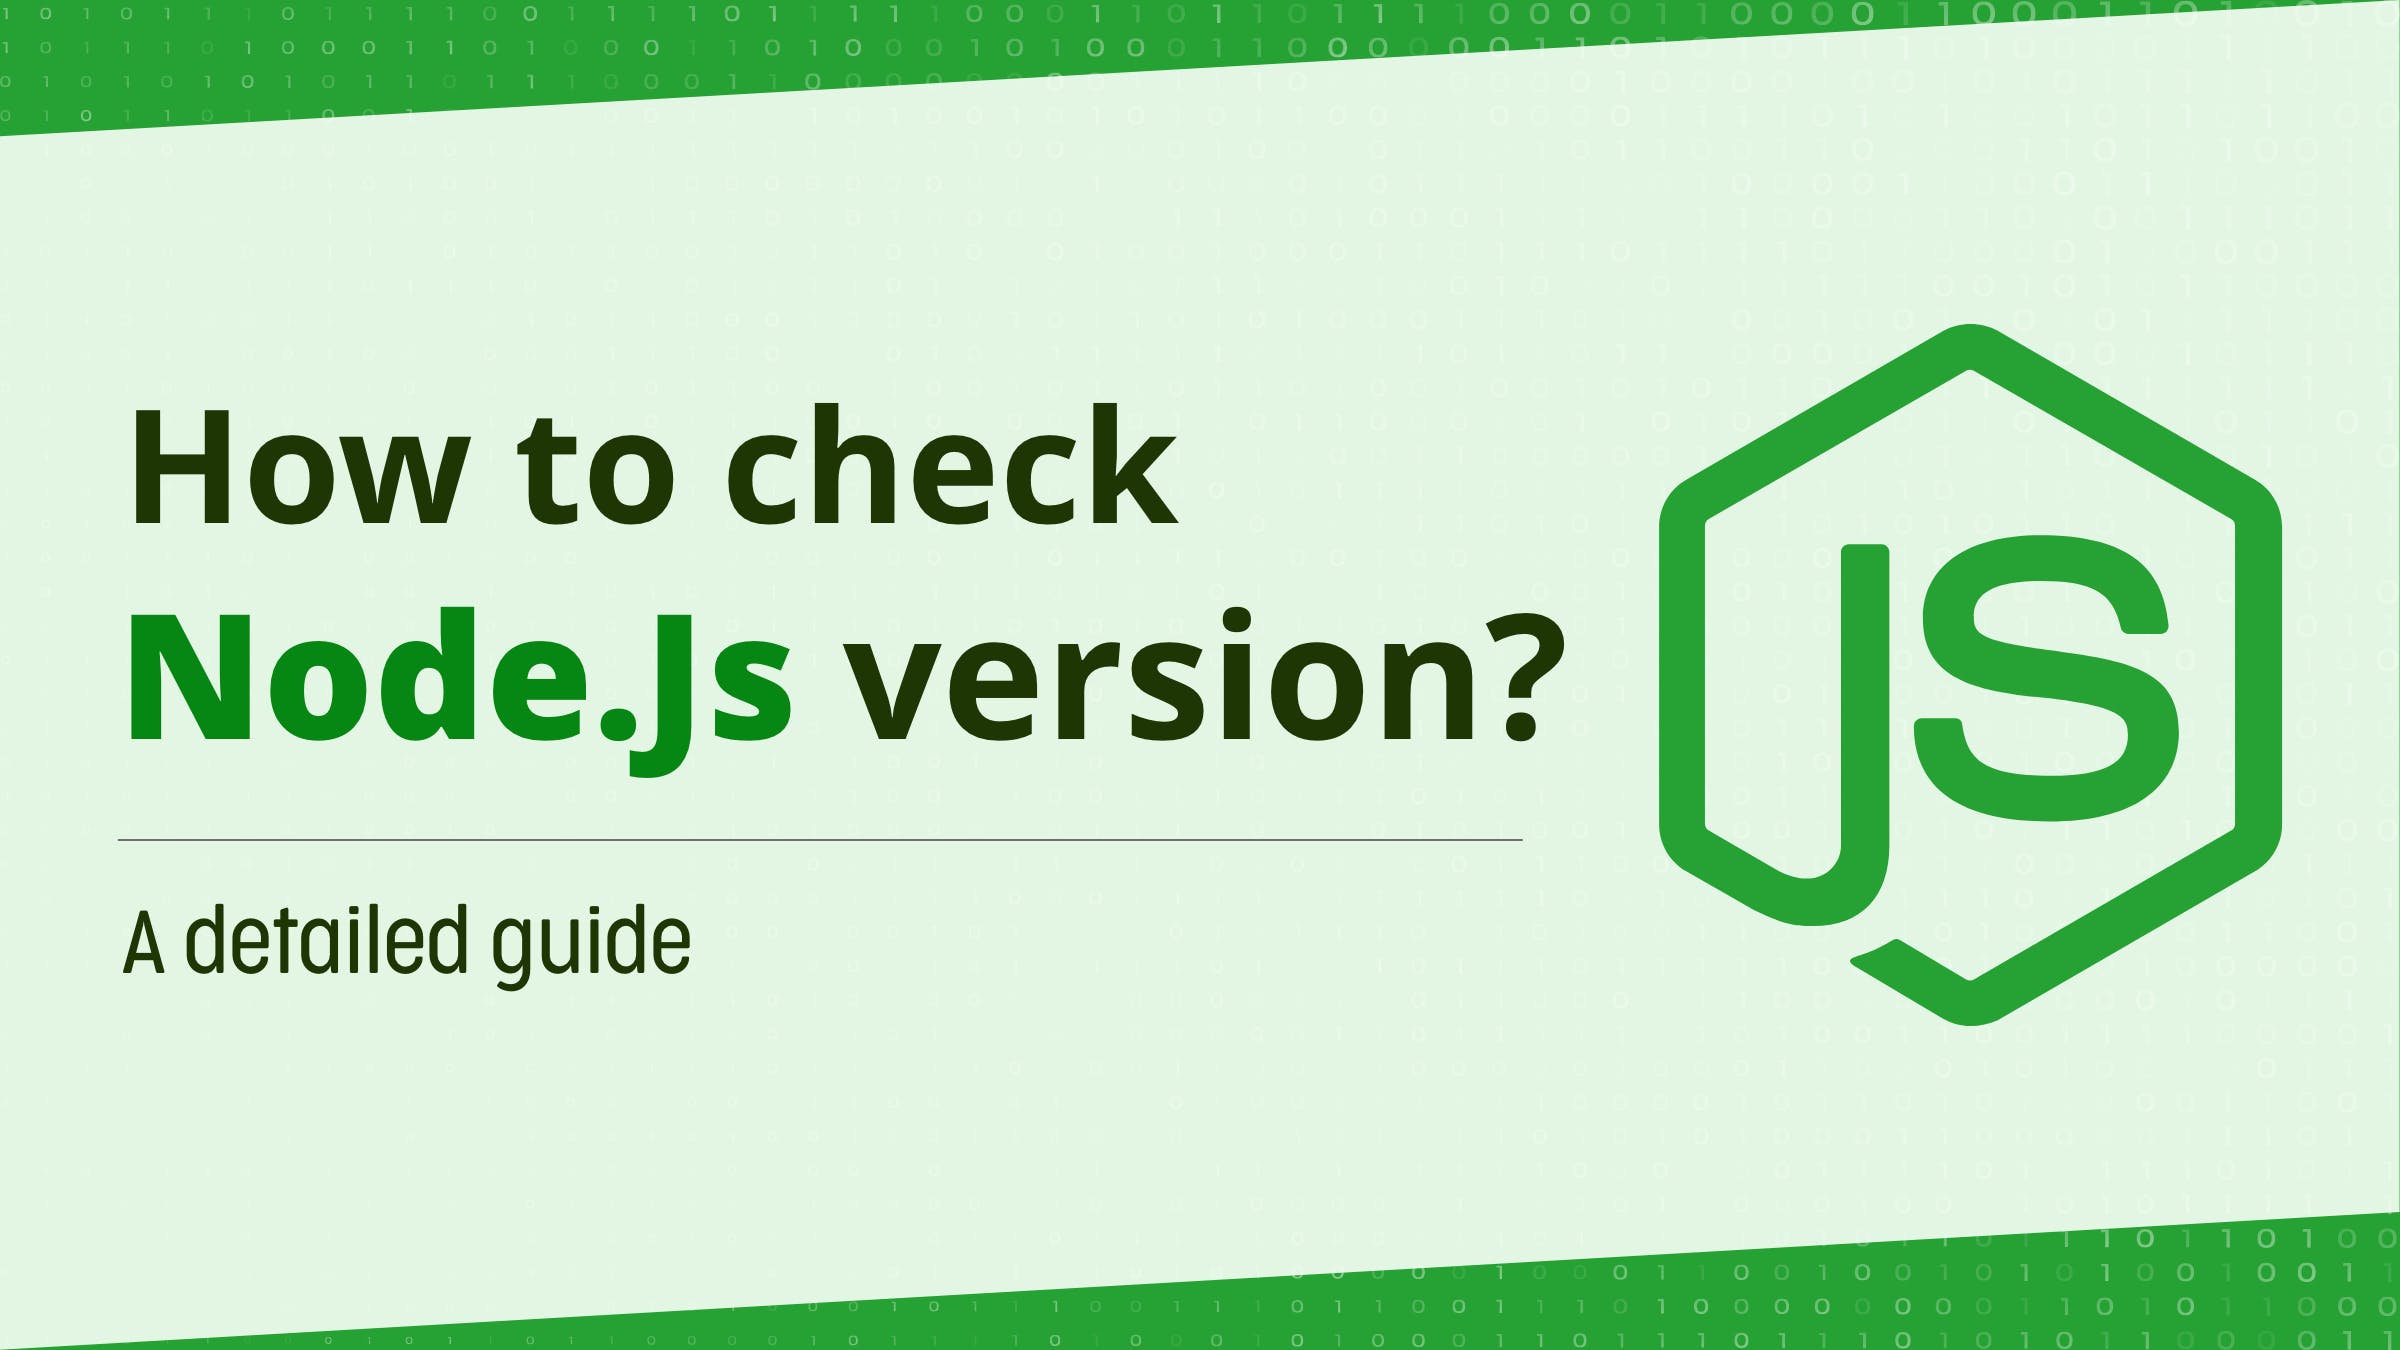 How to Check Node.js Version? media 1